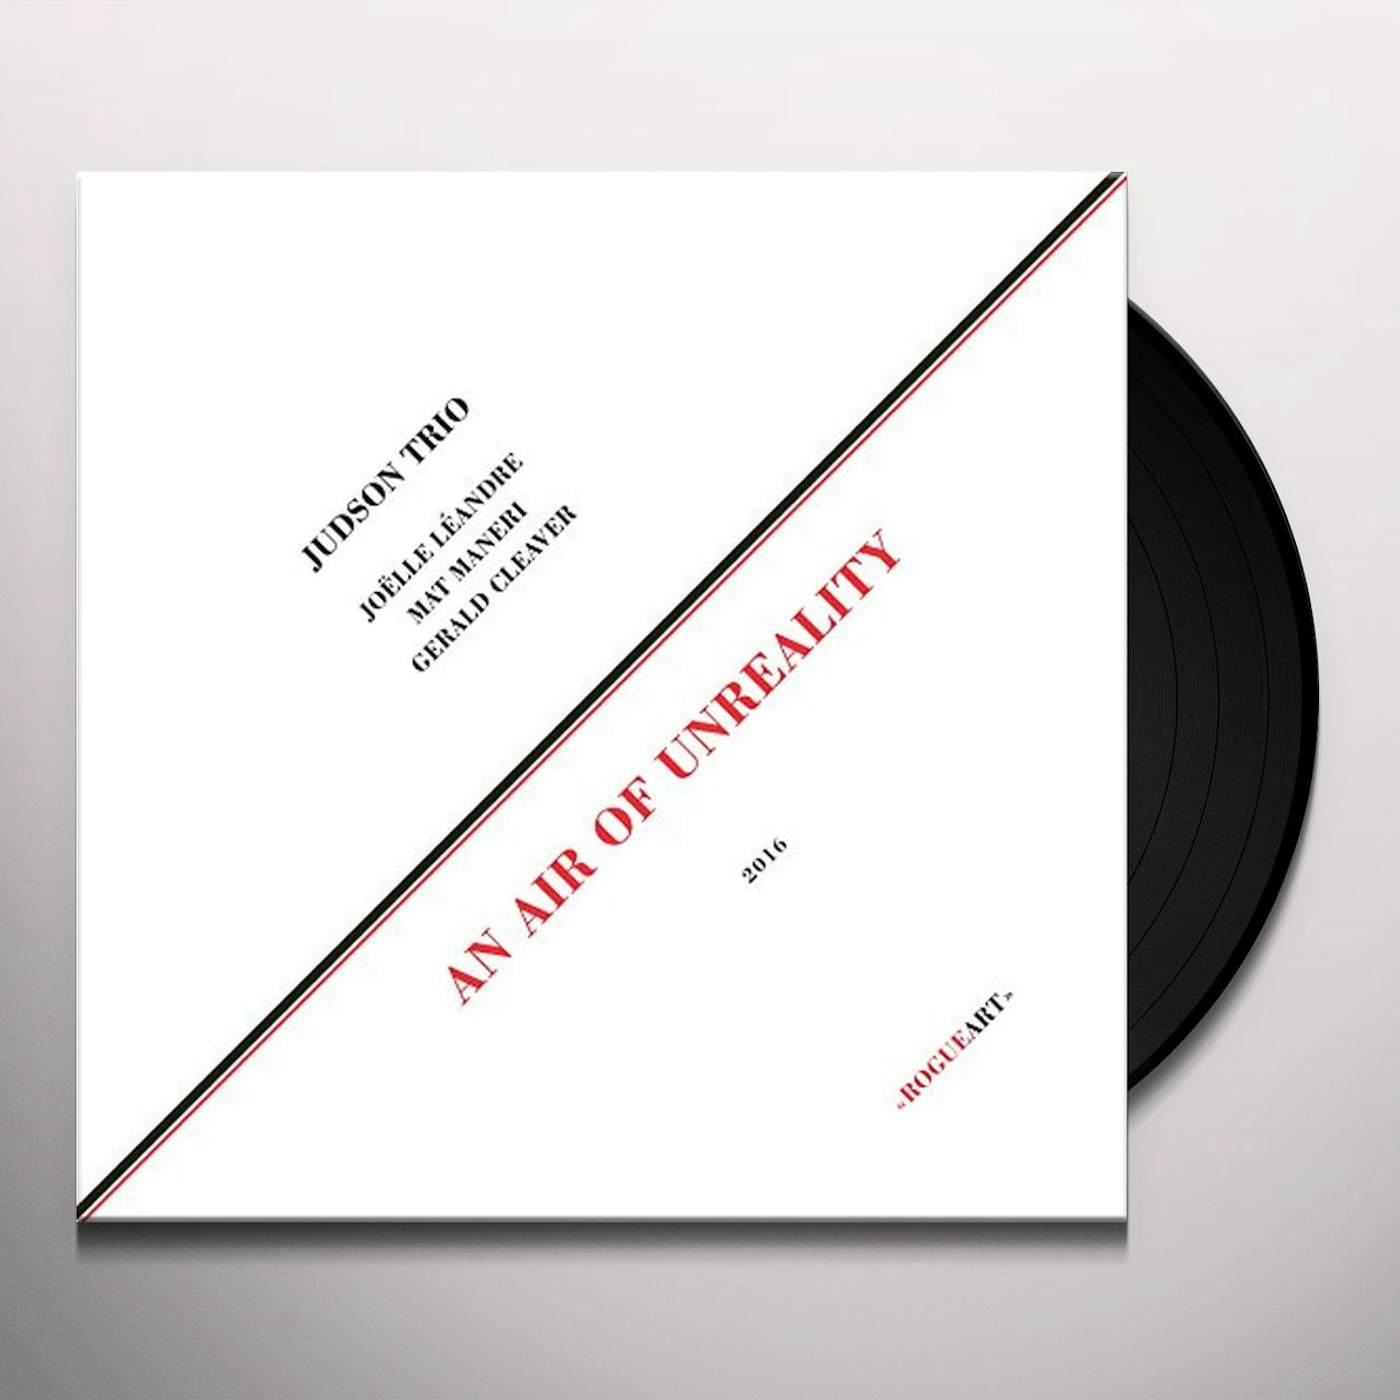 Judson Trio AN AIR OF UNREALITY Vinyl Record